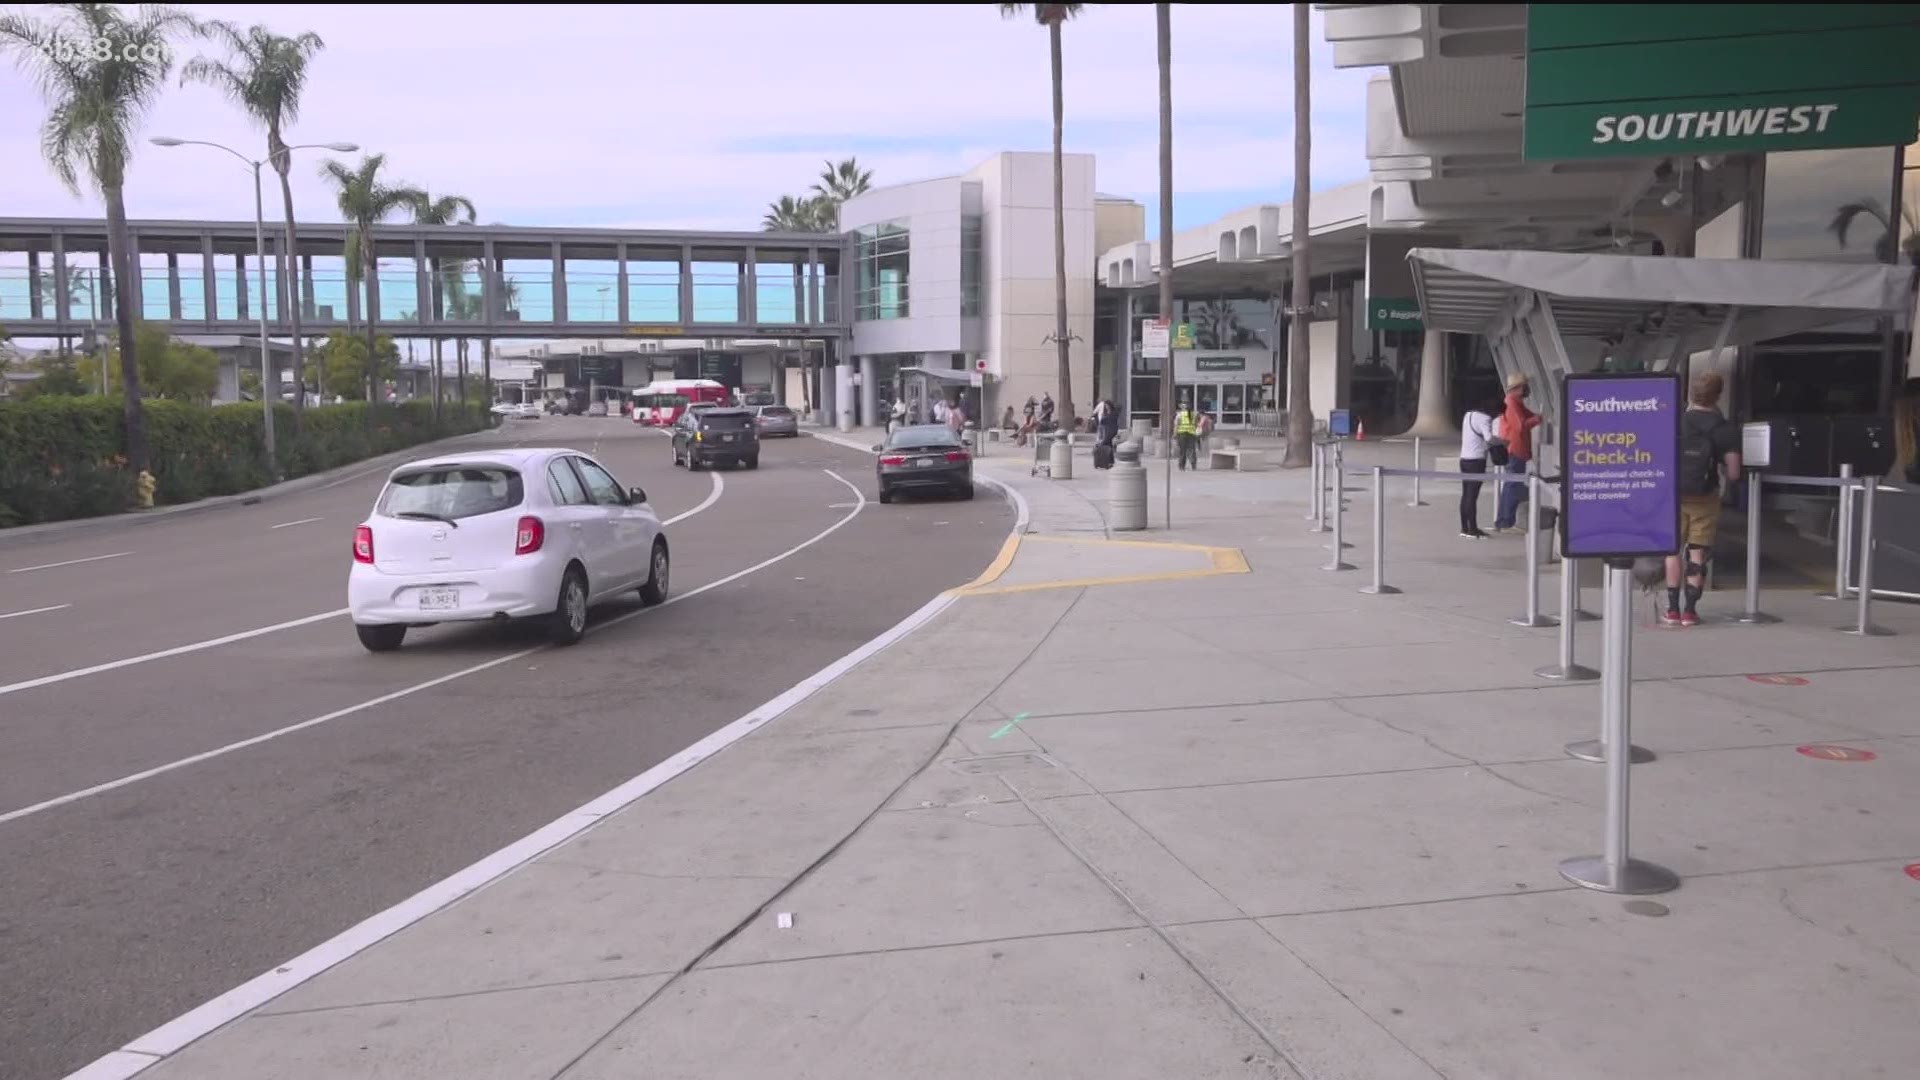 While travel is down this year in comparison to last year, thousands are still expected to fly from San Diego.